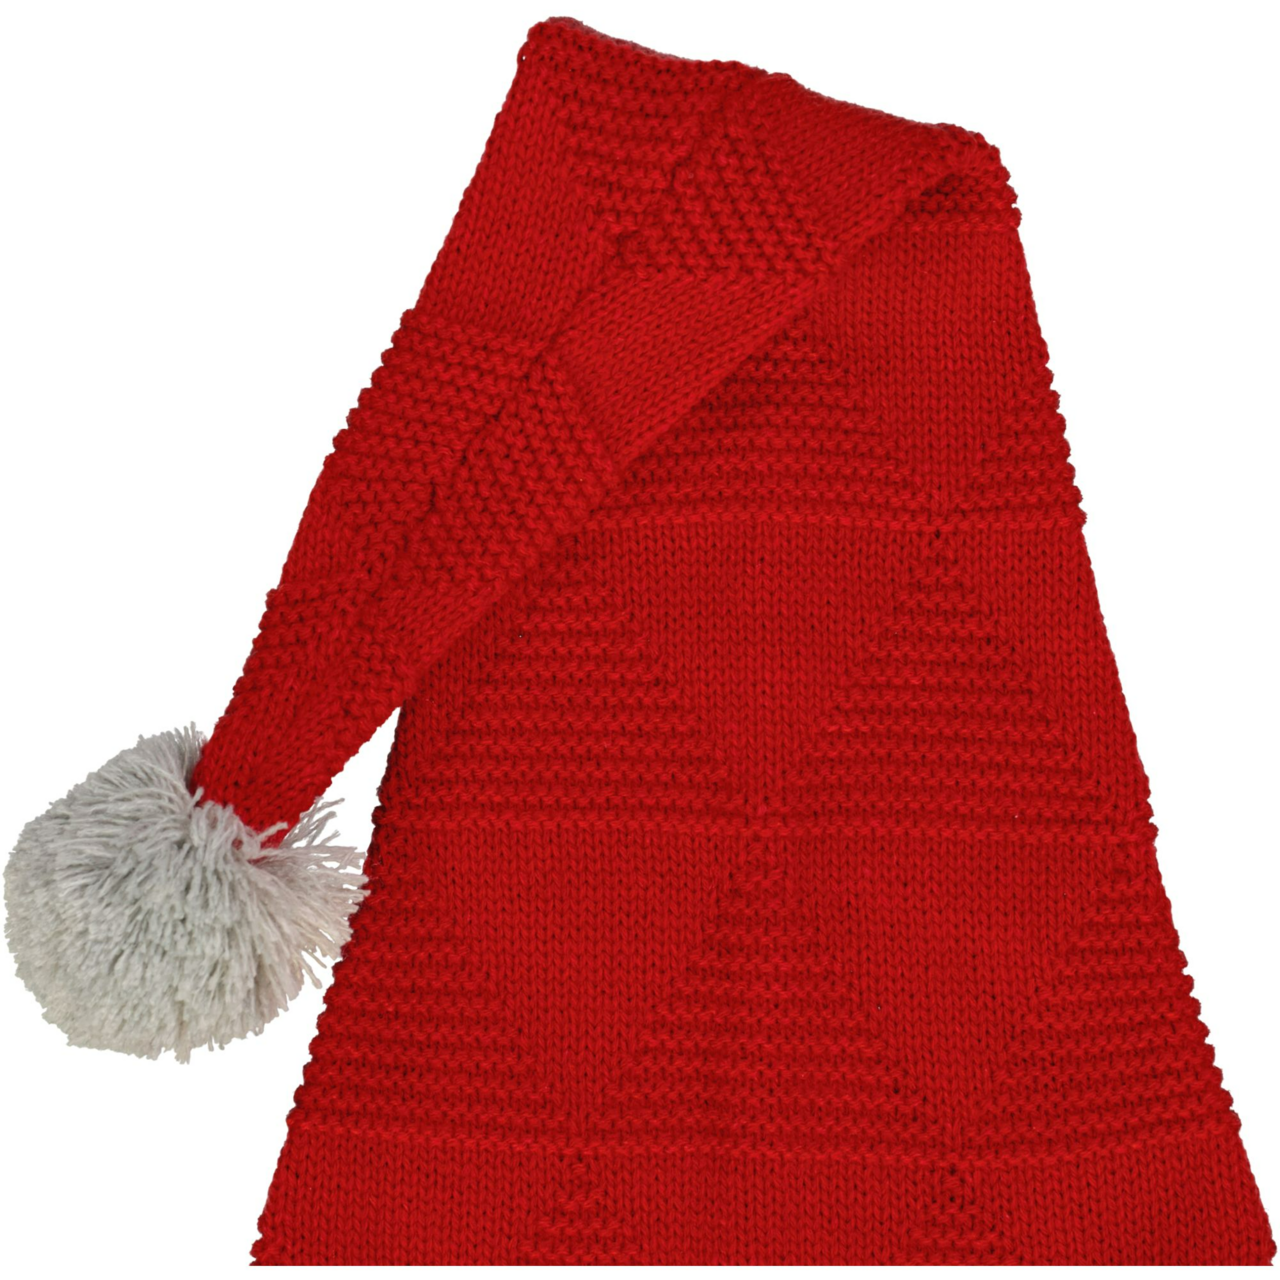 Knitted Christmas hat Red